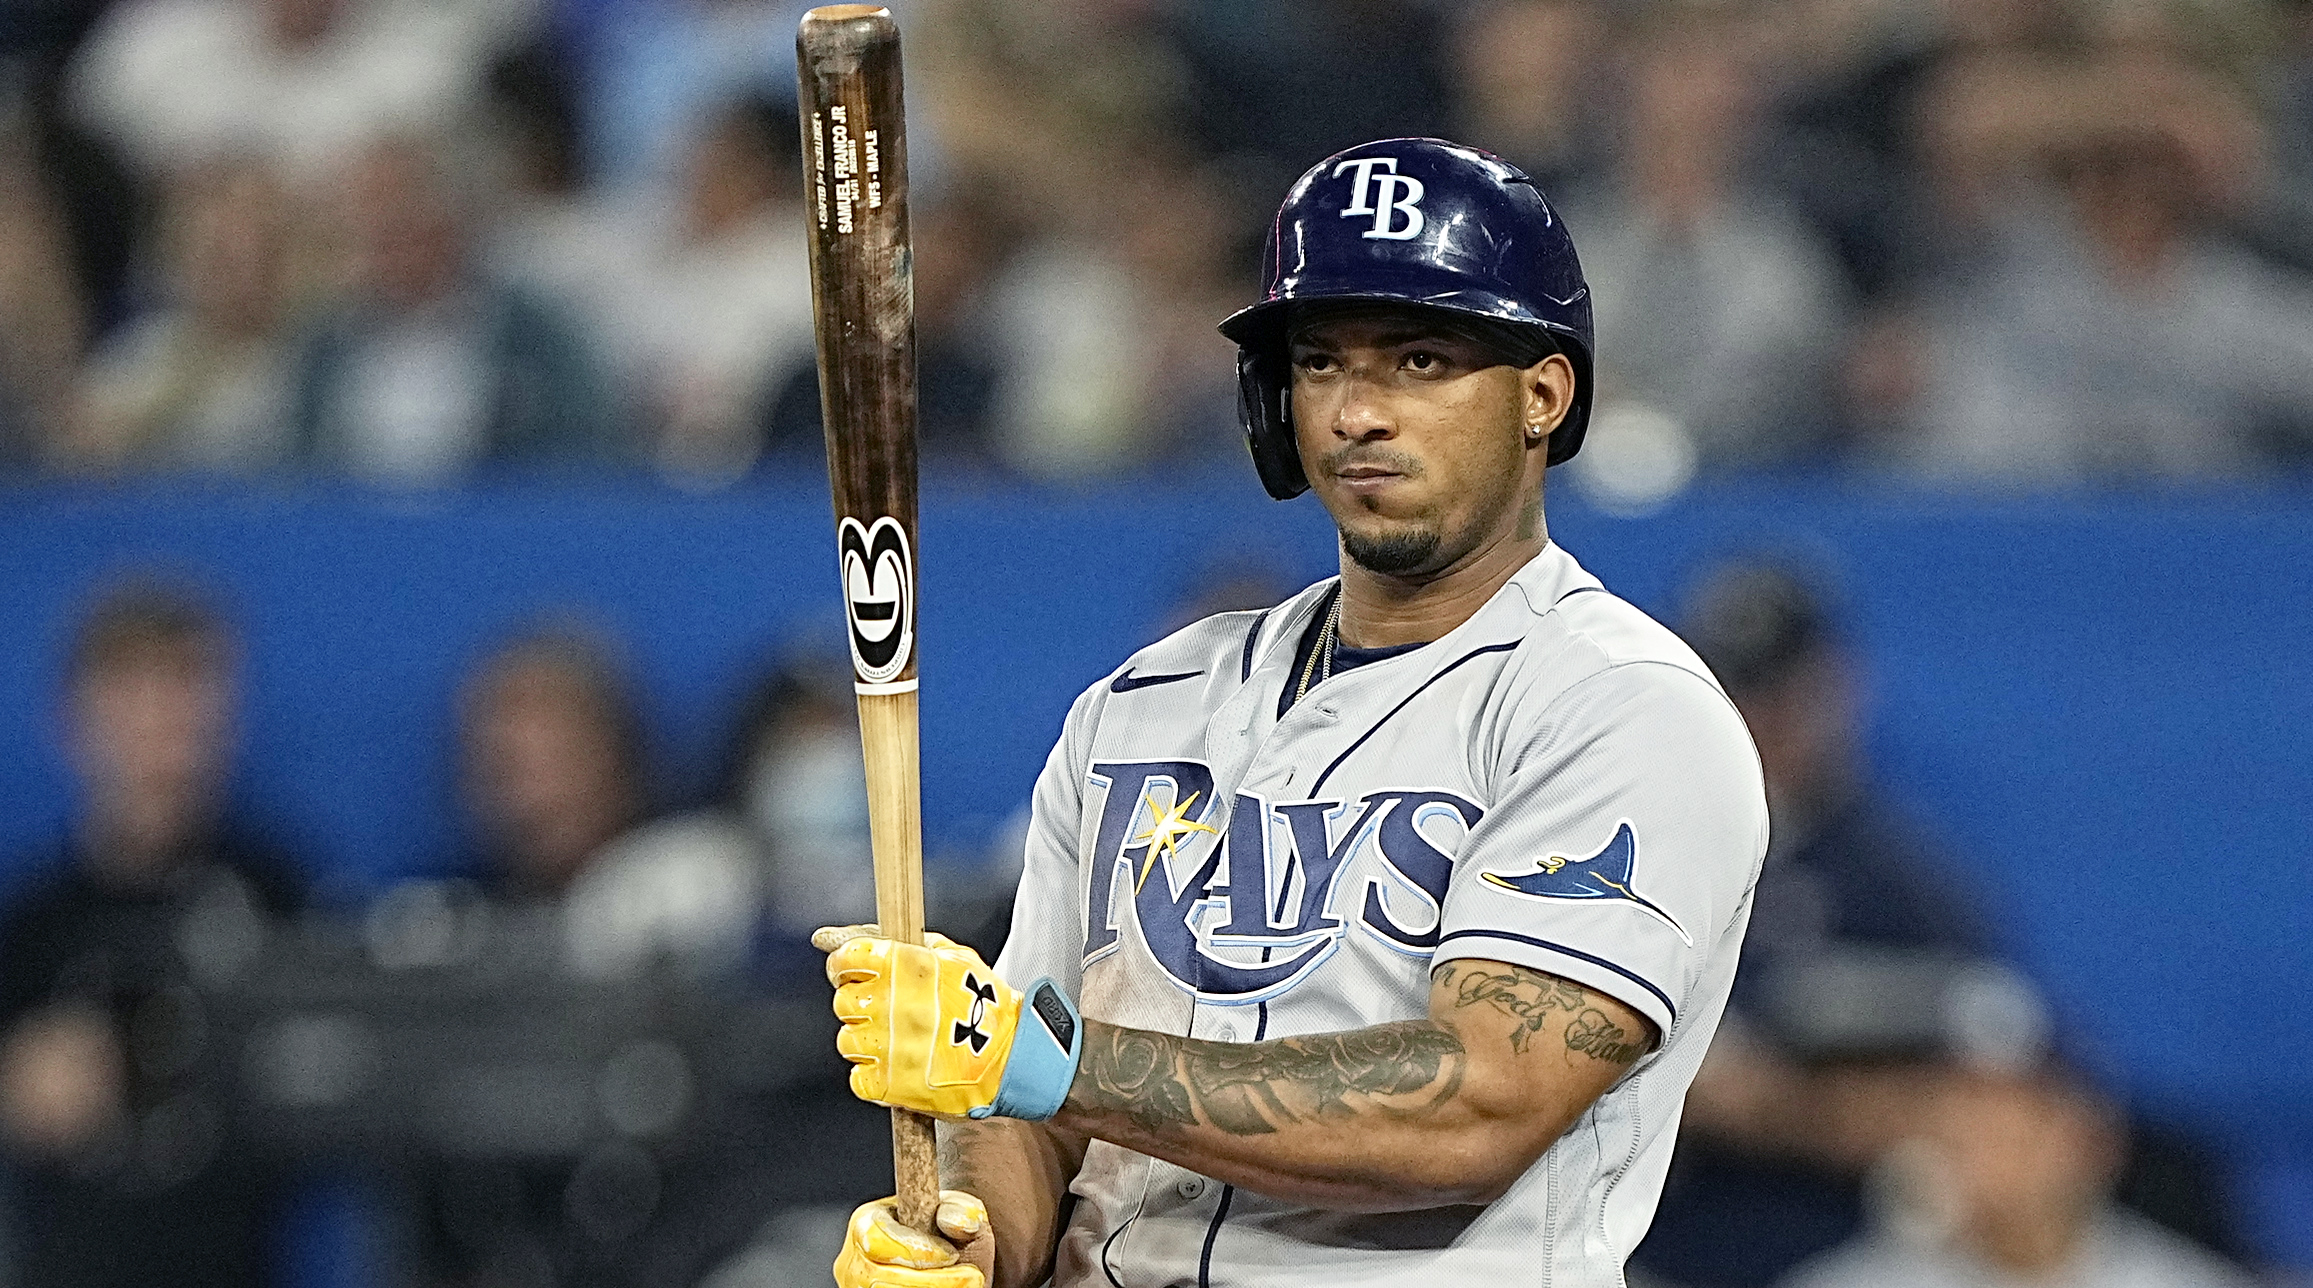 Wander Franco Investigation: Outlook for Rays Shortstop's Future